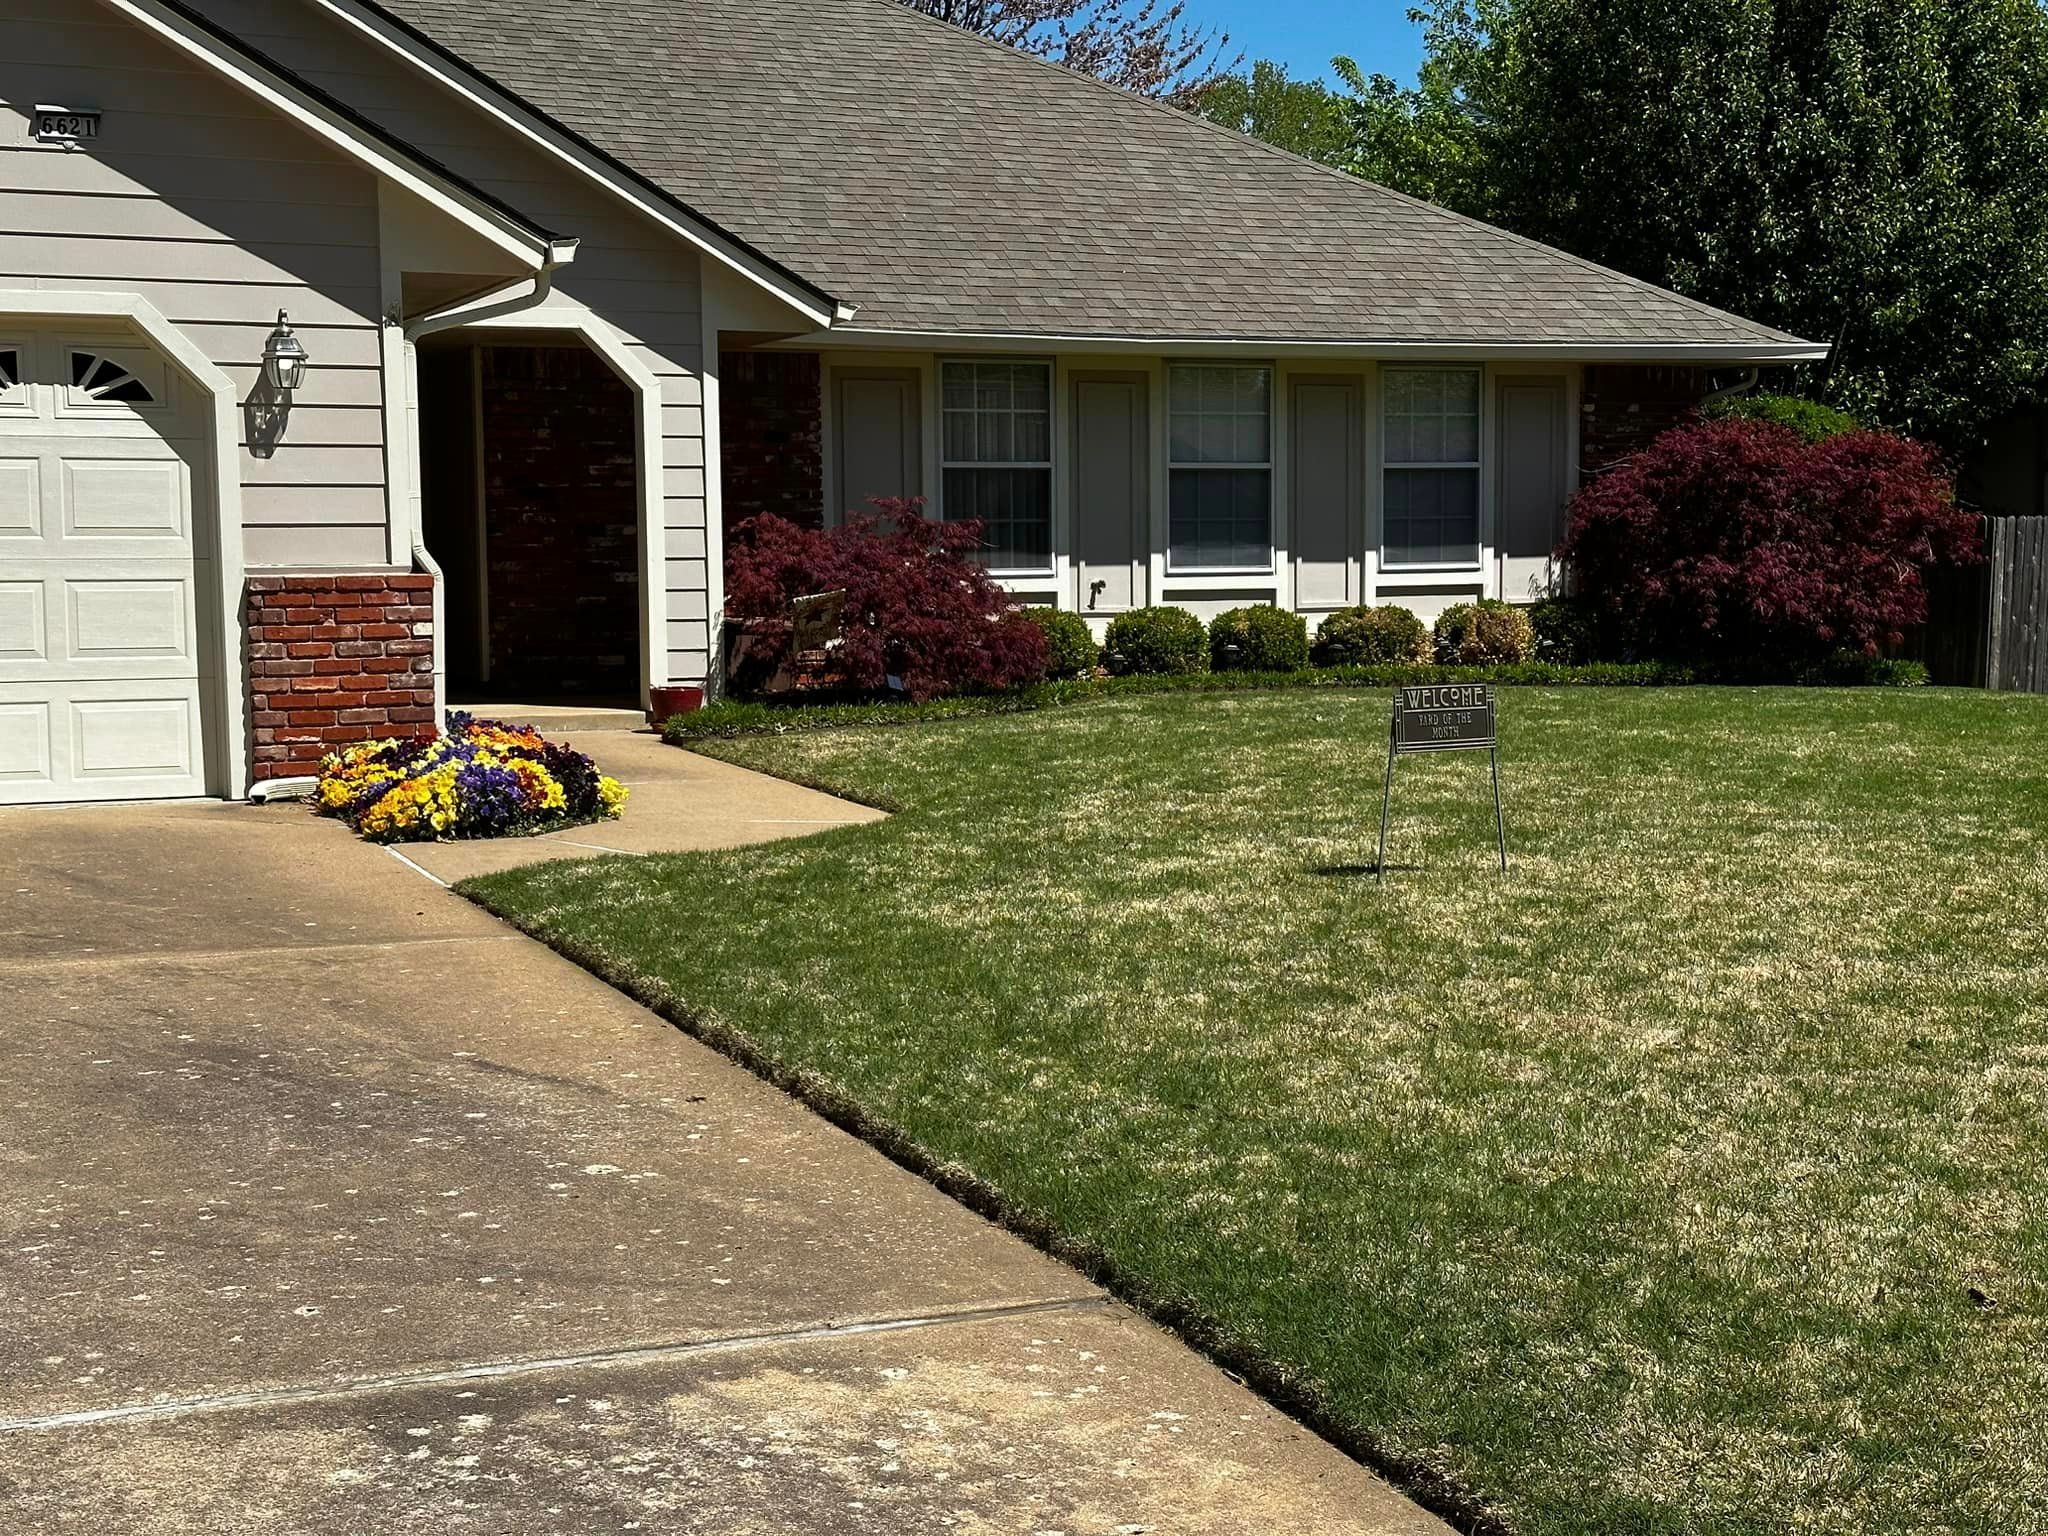  for Lawn Dogs Outdoors Services in Sand Springs, OK